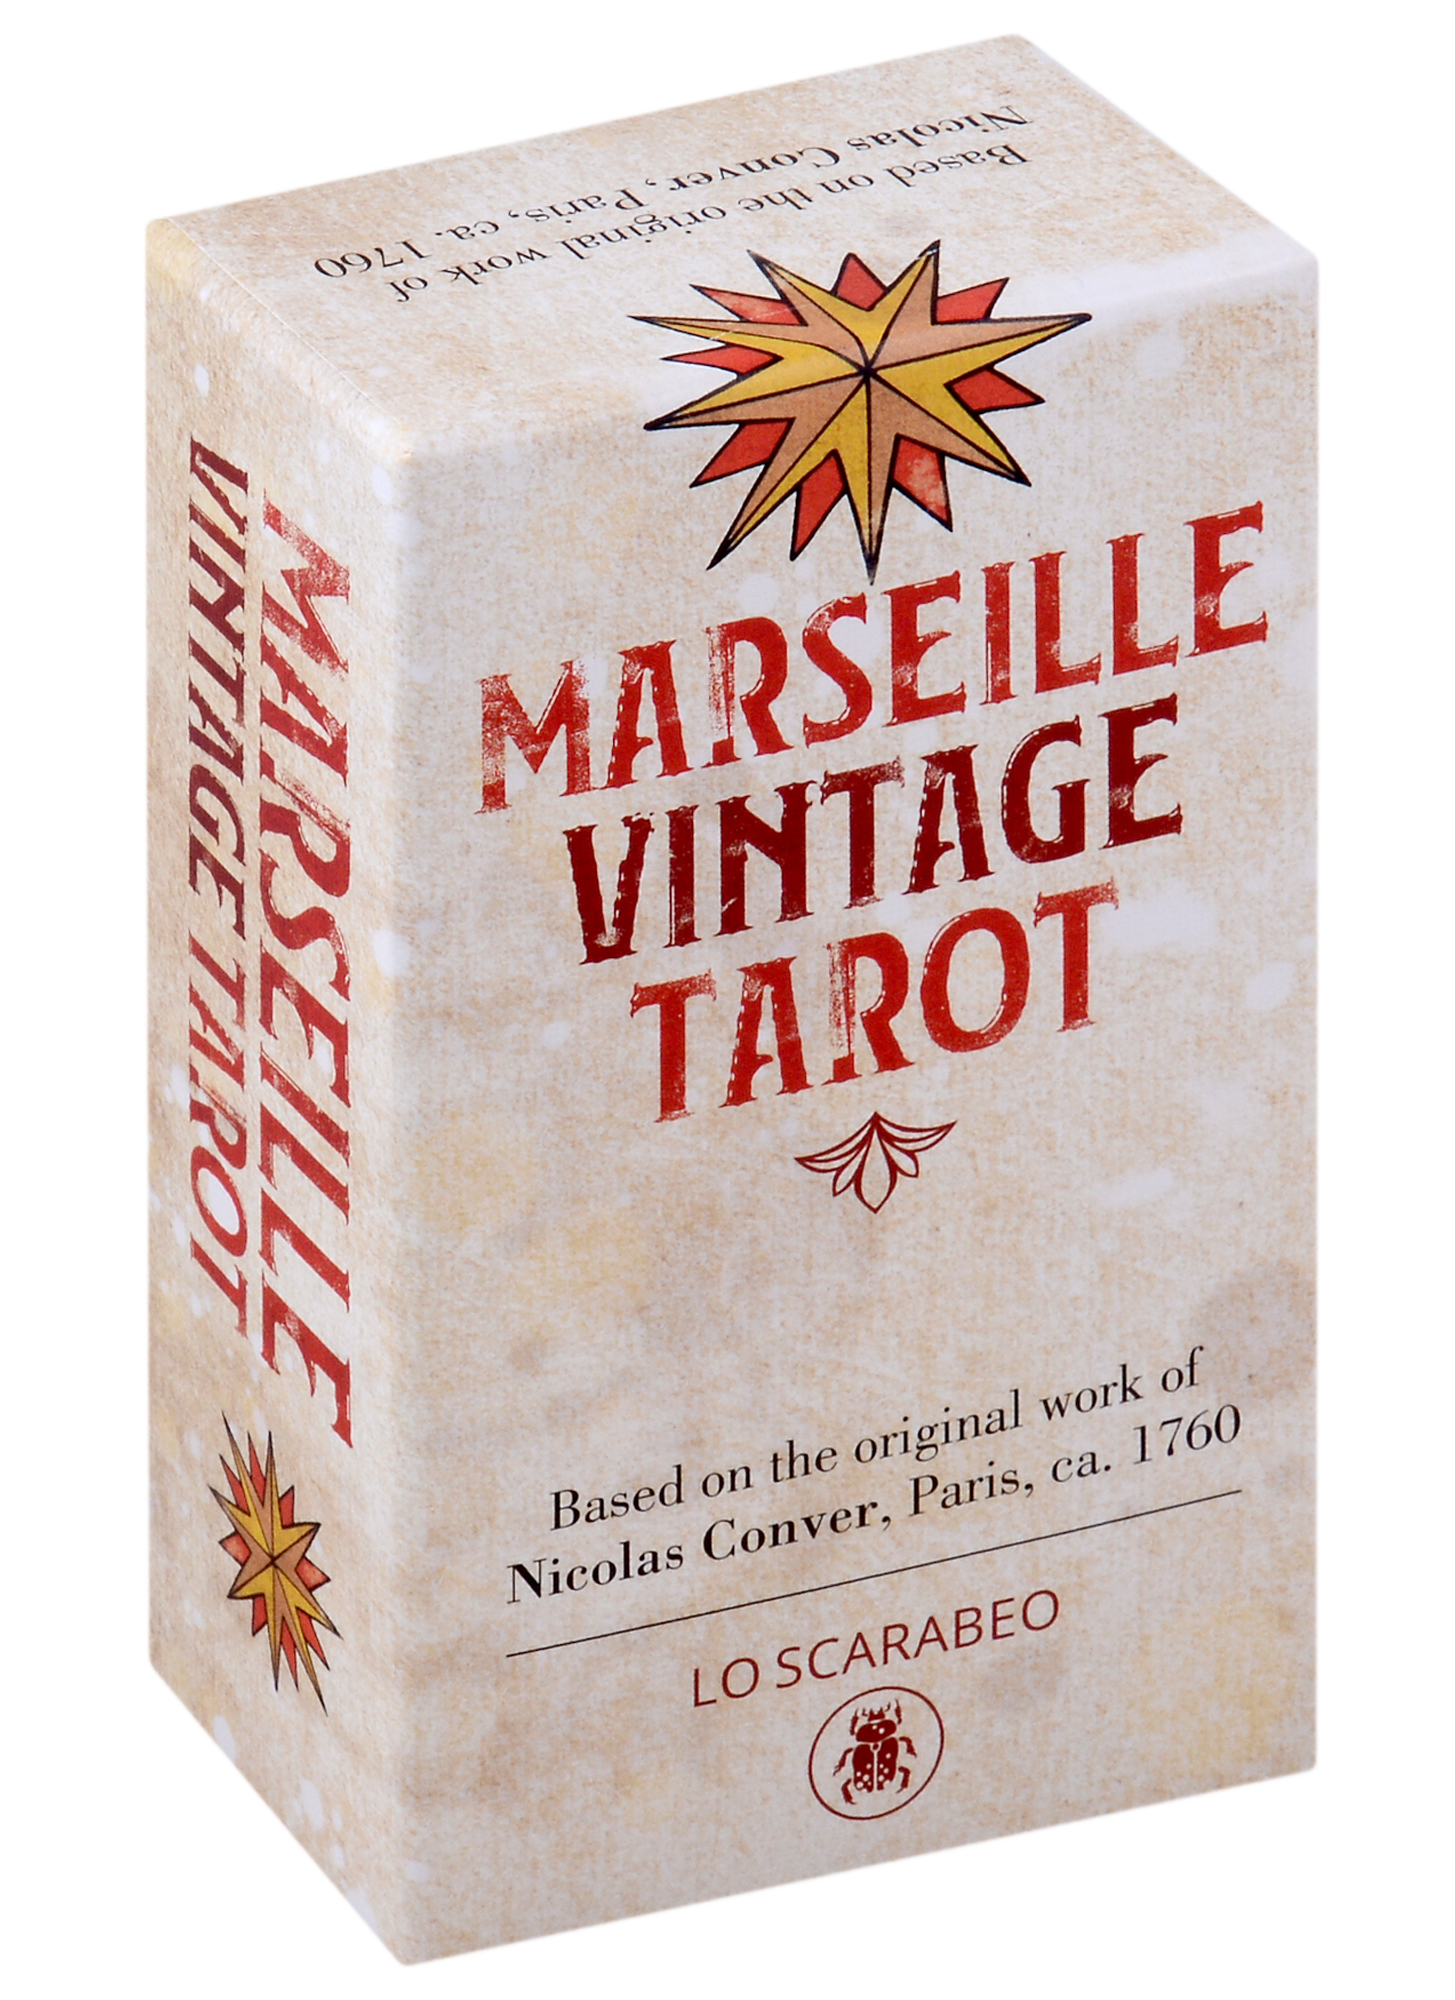 джамал р african american tarot 78 cards with instructions Marseille Vintage Tarot (78 Cards with Instructions)